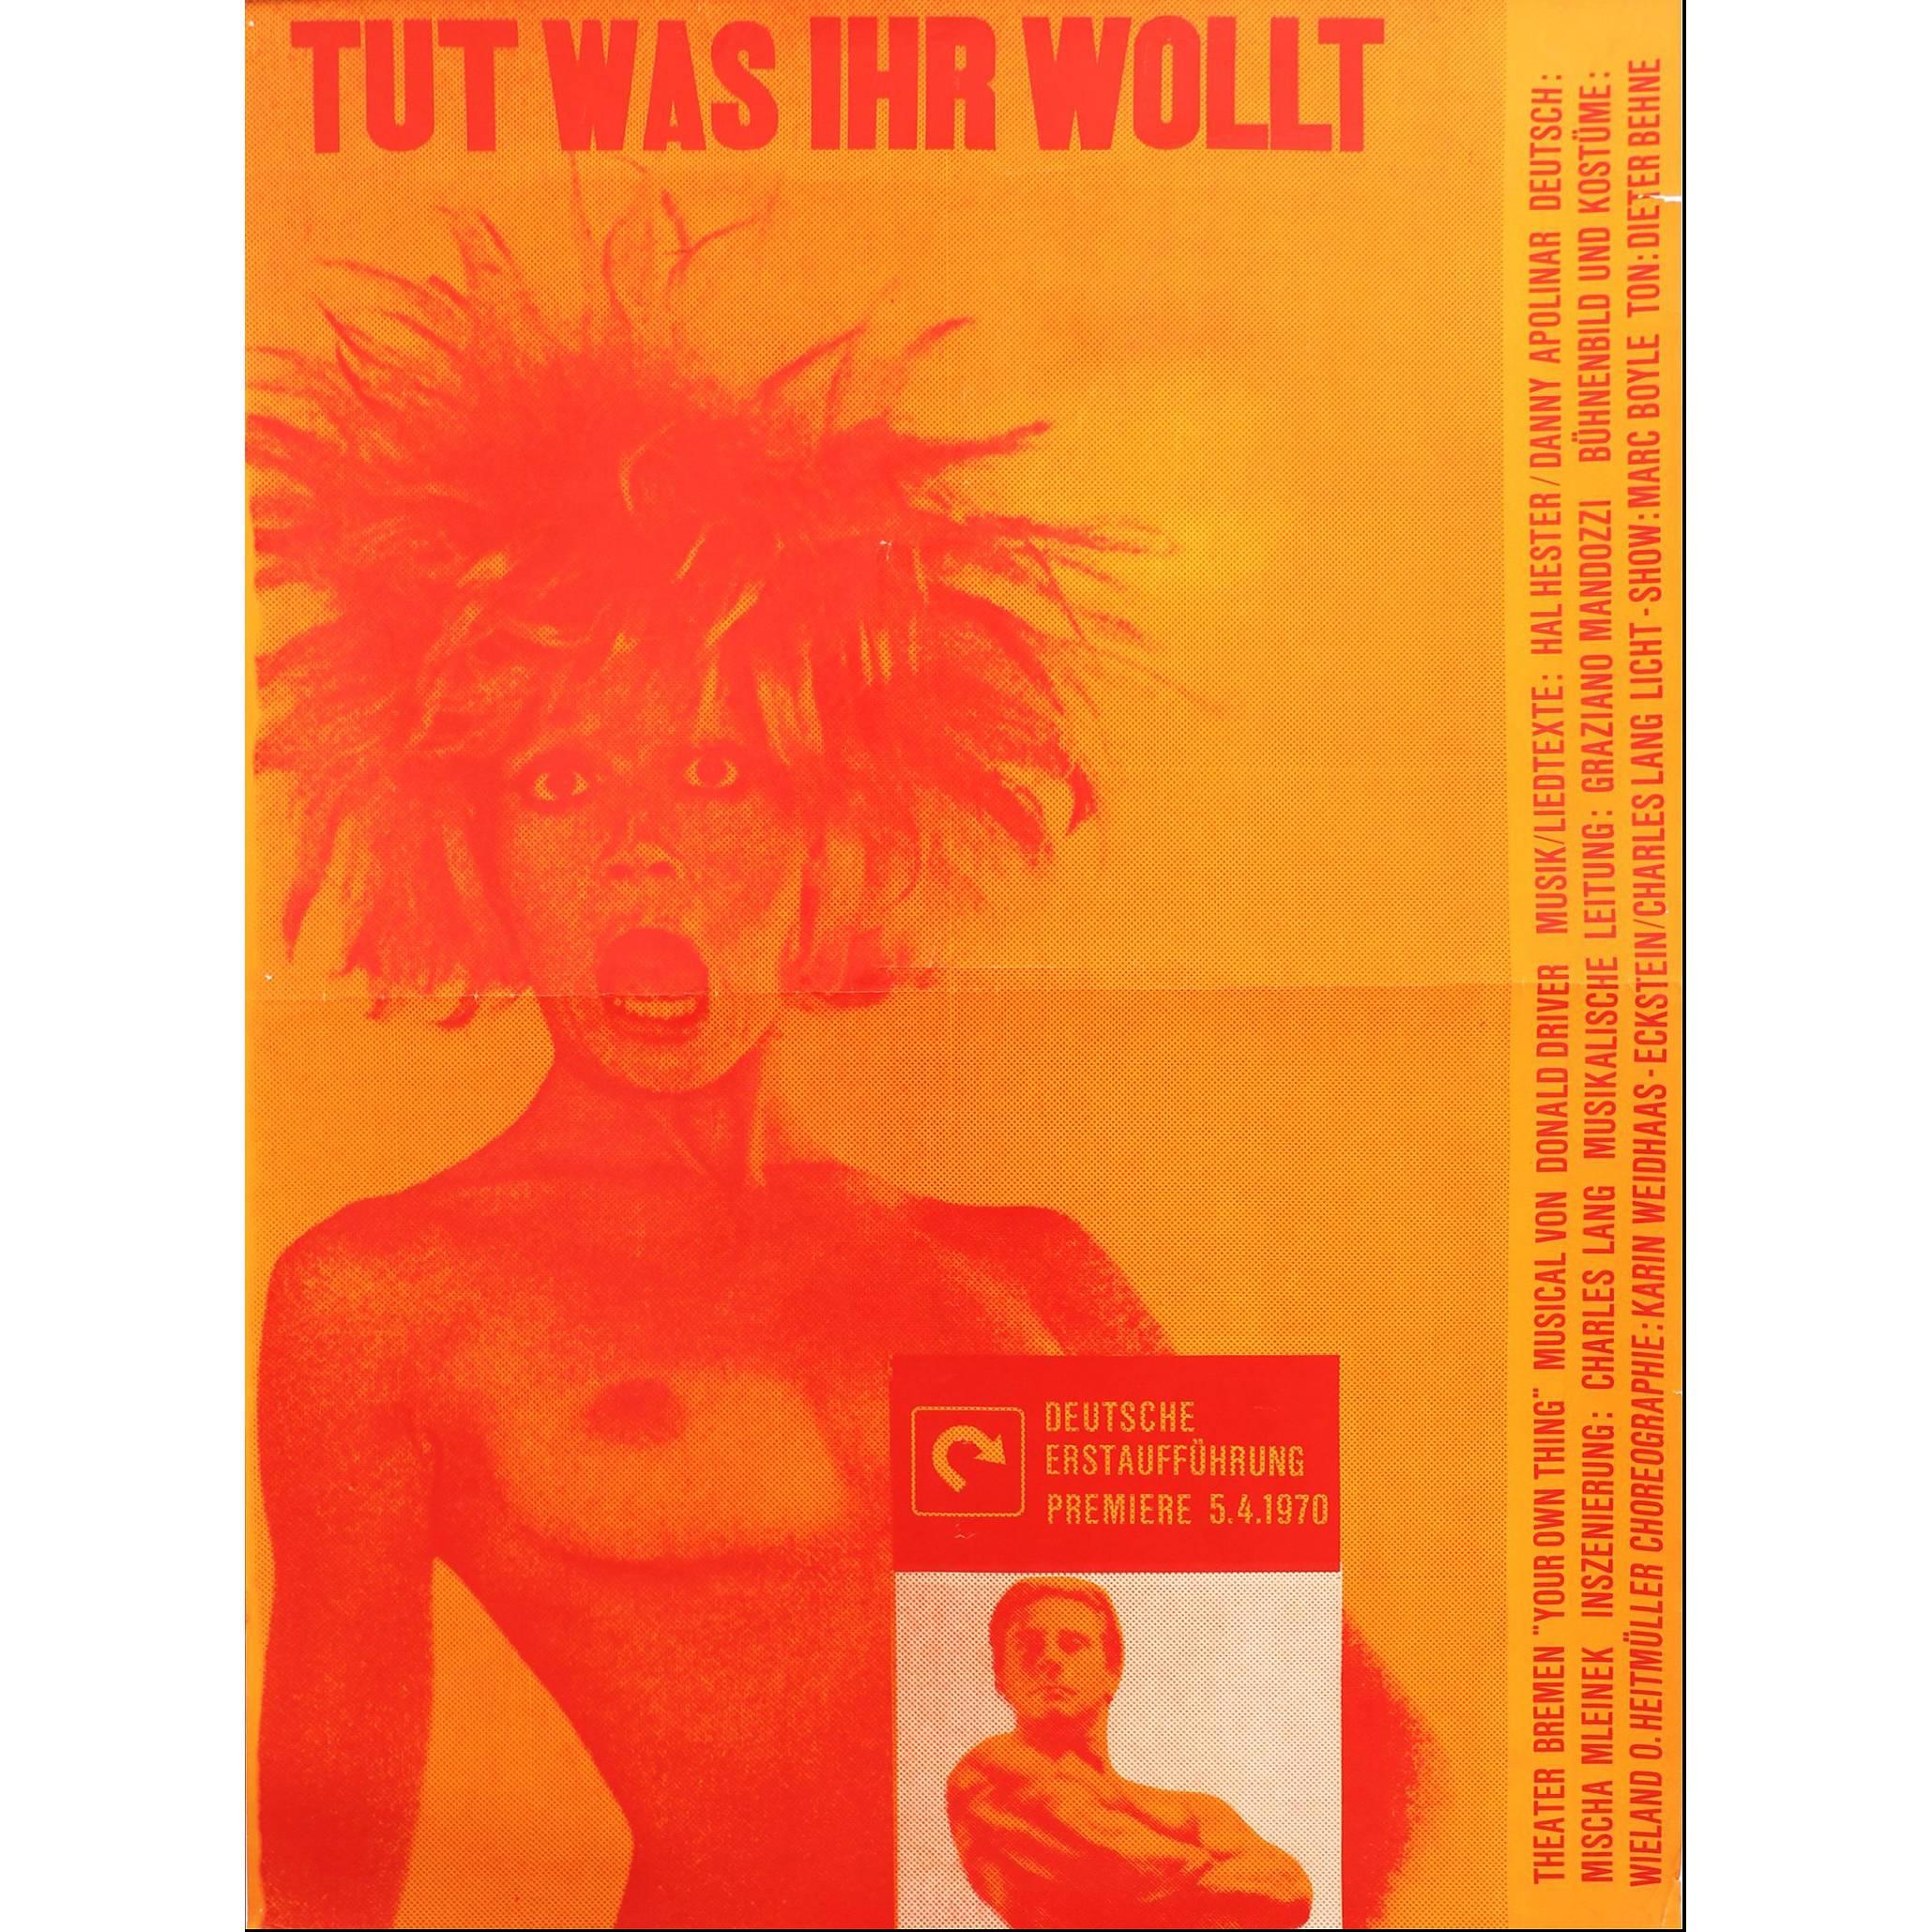 Your Own Thing 'Tut, was ihr wollt' German Poster Rock Musical Hal Hester, 1970